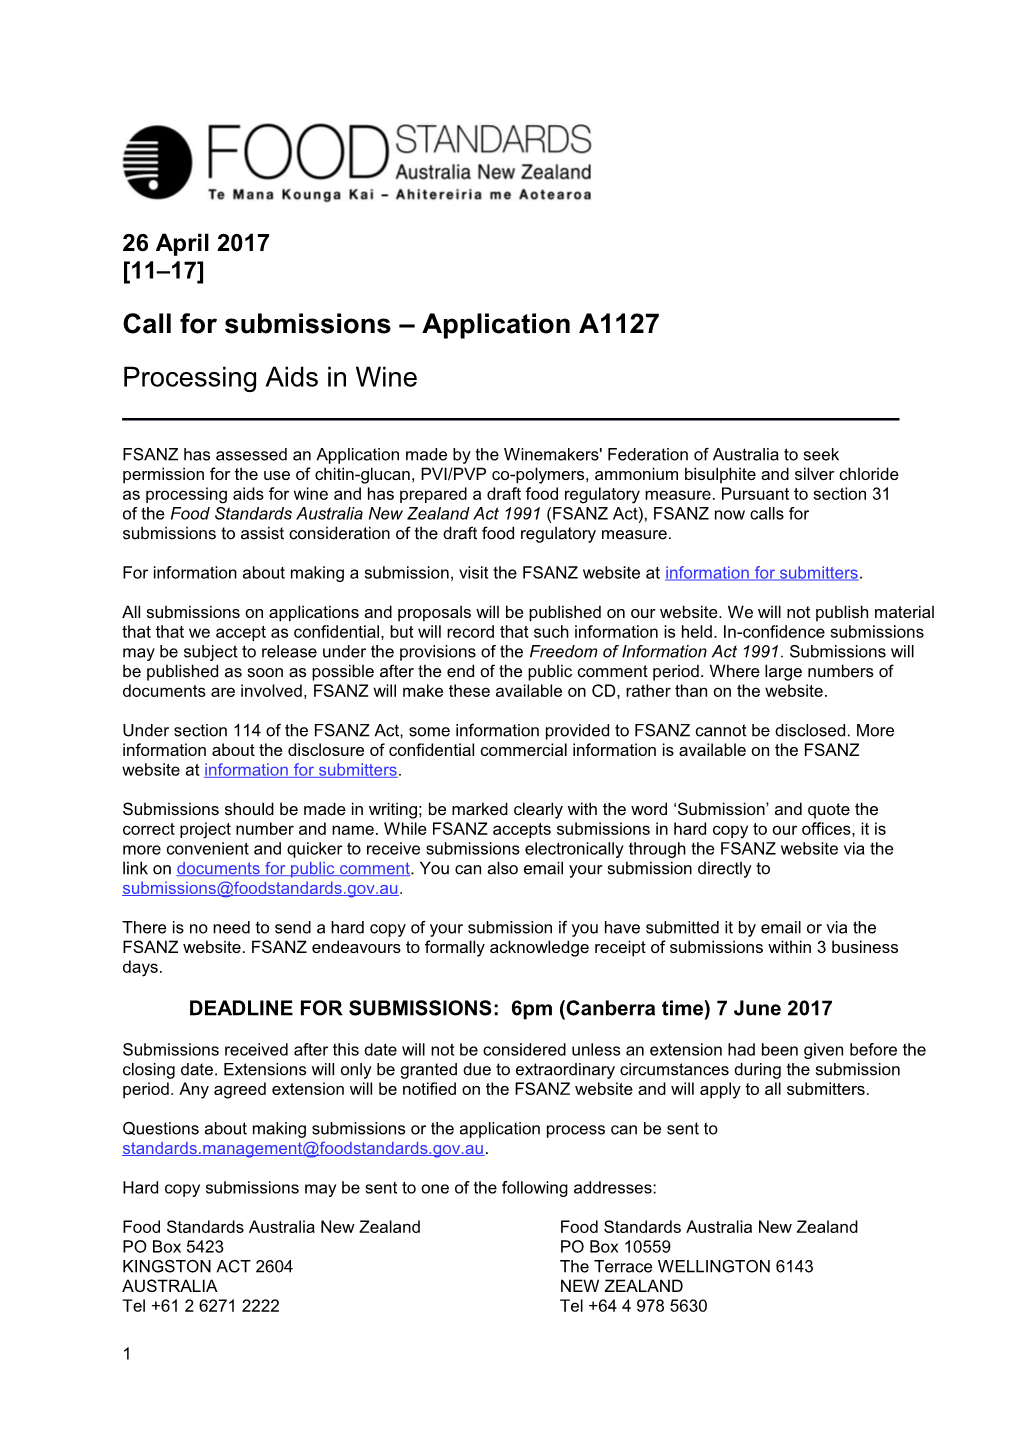 Callforsubmissions Application A1127